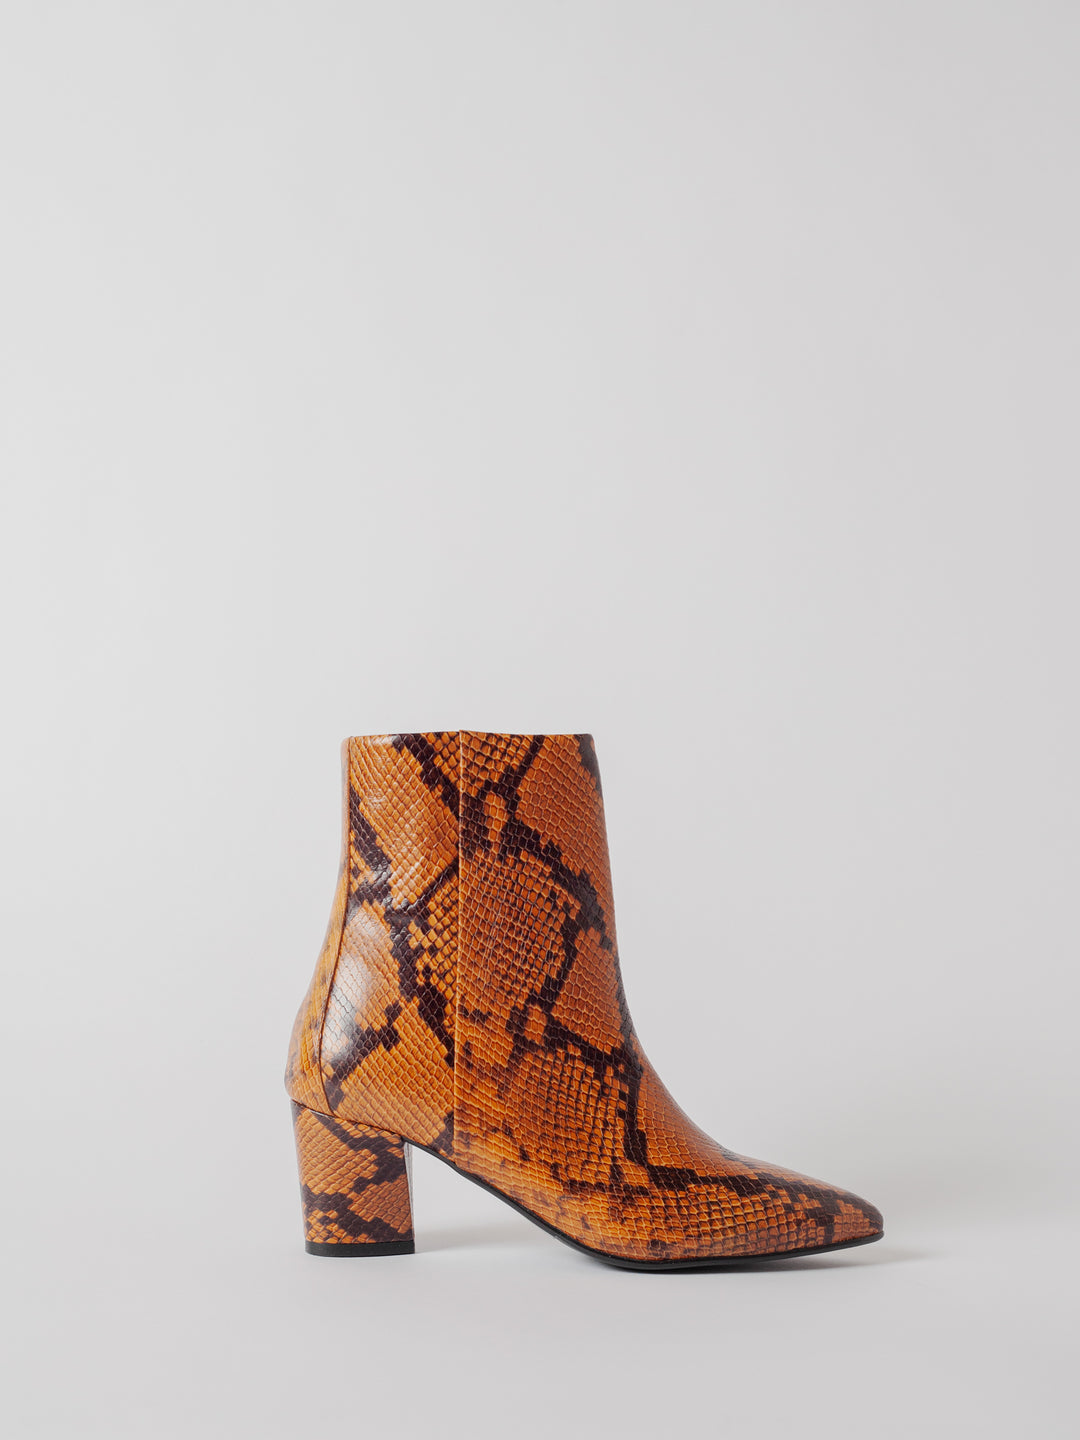 Blankens The Riverside Boot Serpent, Reptile embossed calf leather. Serpent embossed leather. Fall Winter boot. Pointy toe